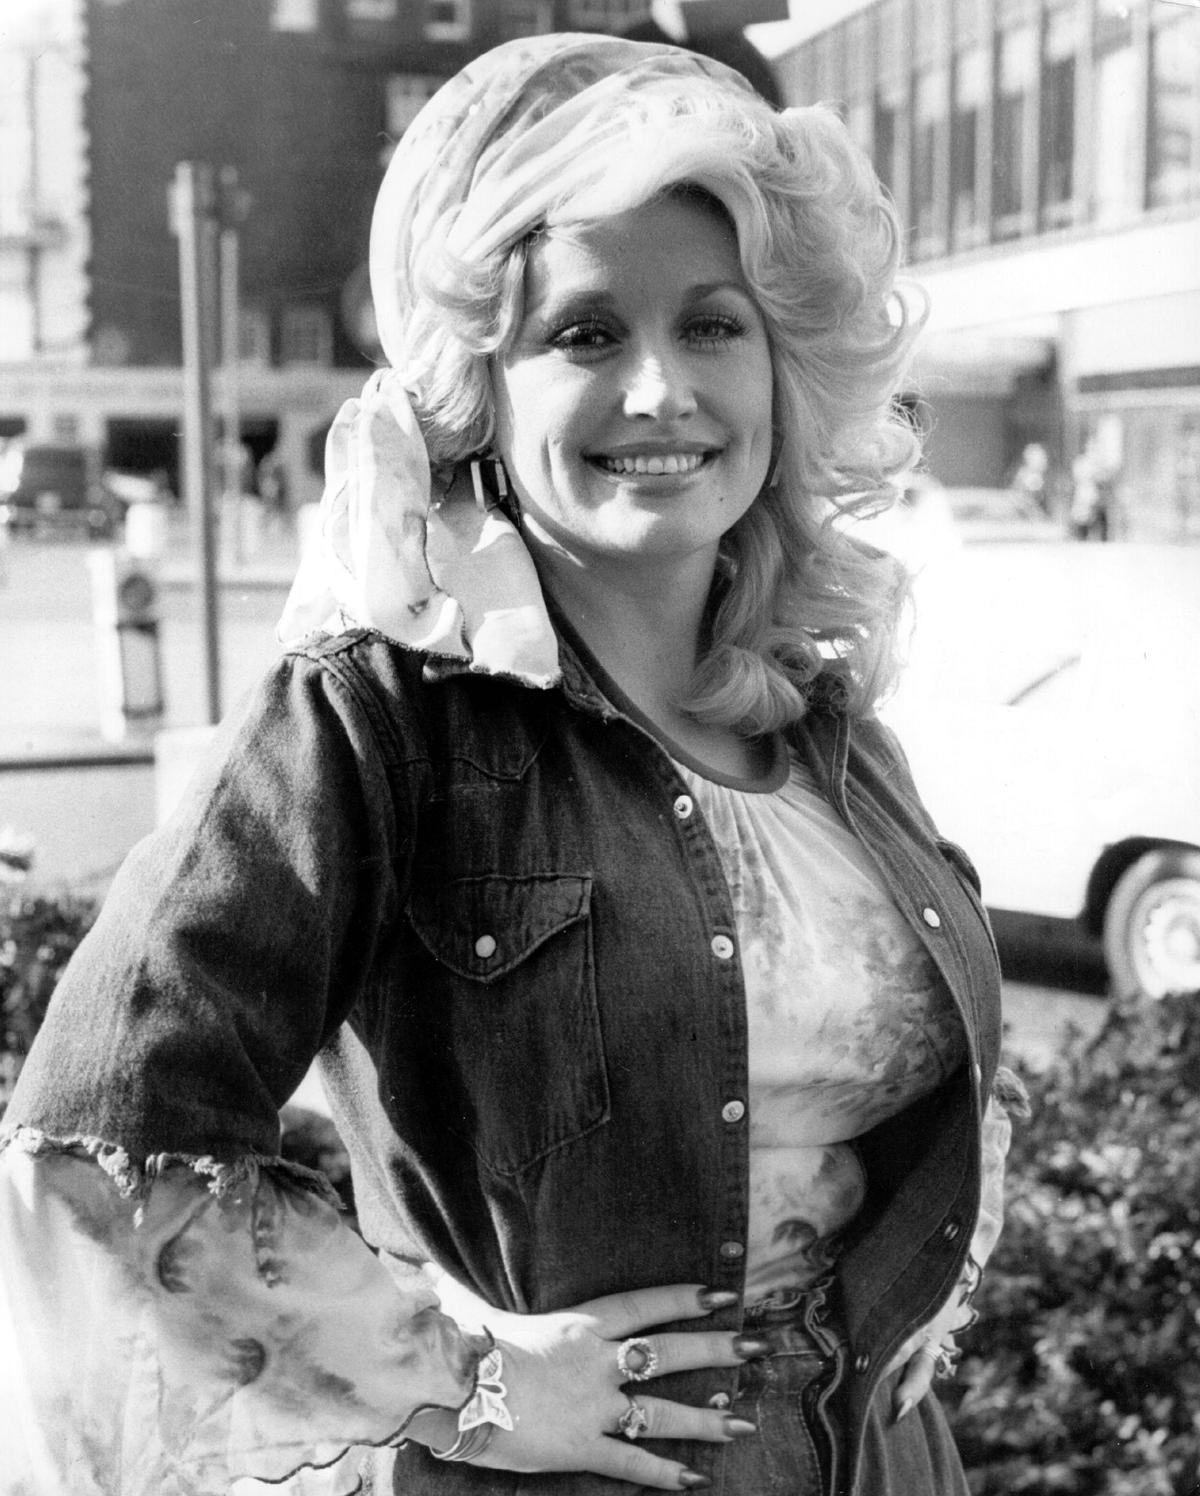 Parton after performing at the King's Theatre in Glasgow, Scotland, in the presence of the Queen on May 20, 1977 (Keystone/Getty Images)